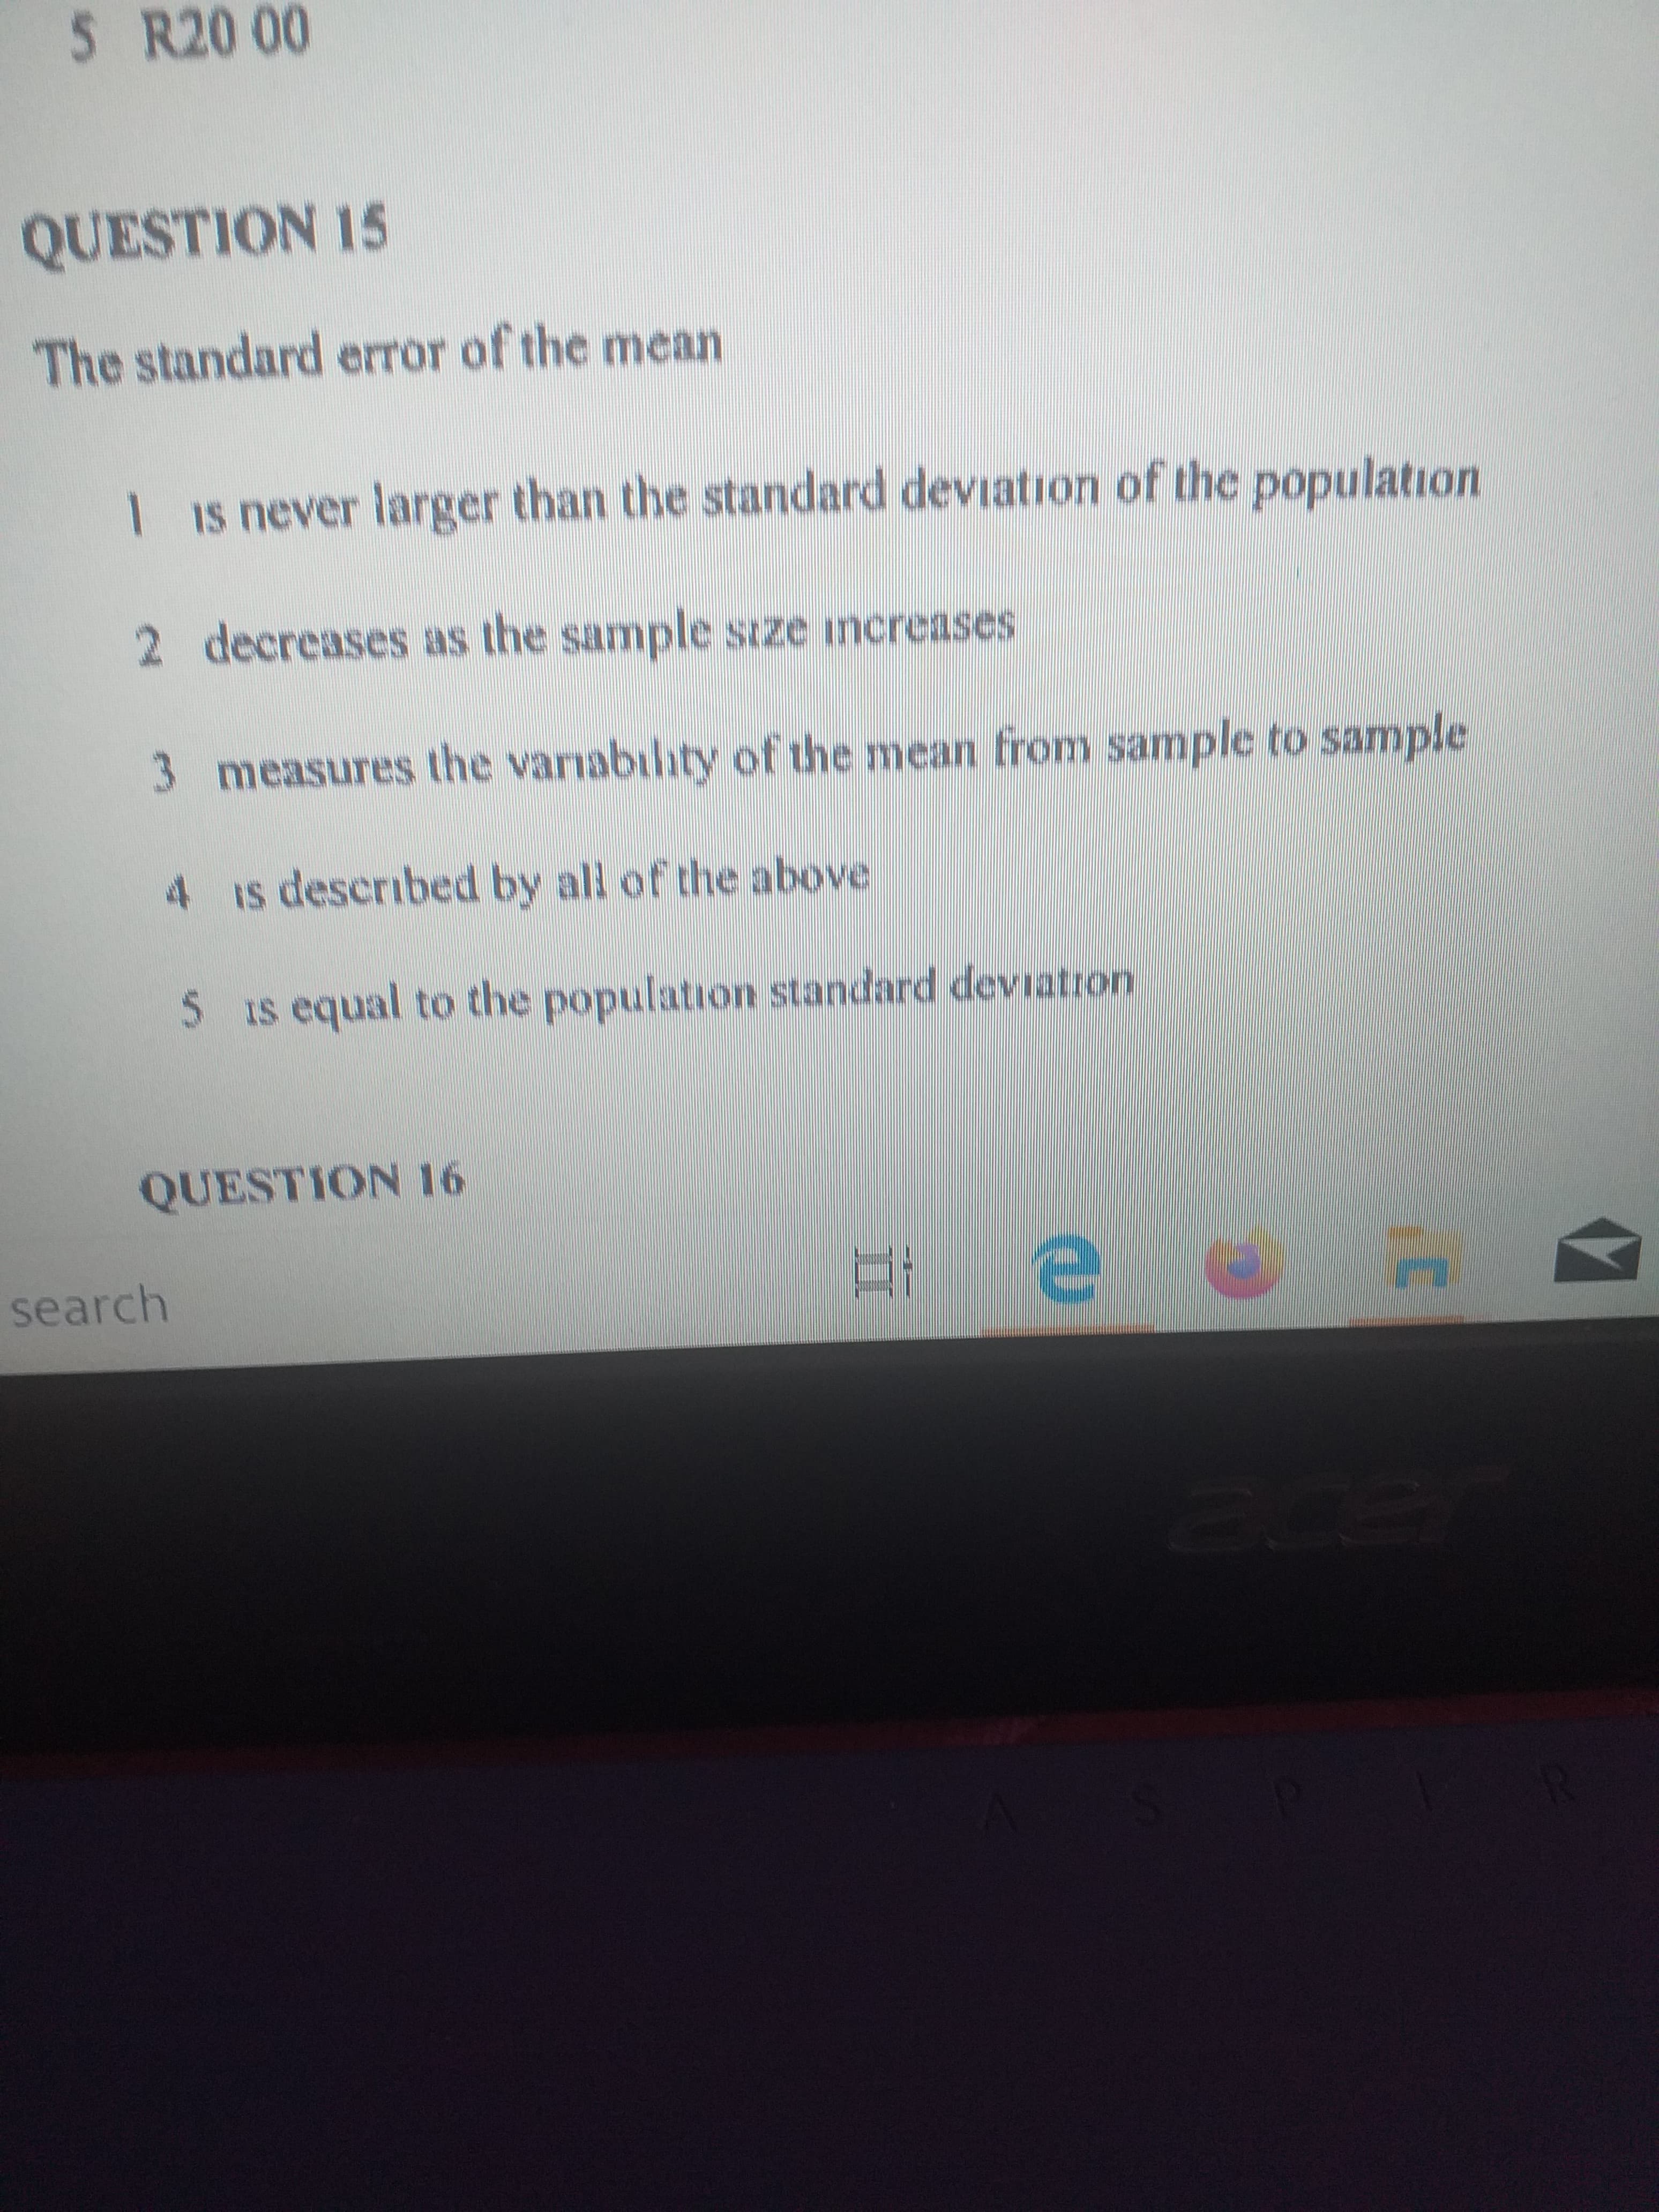 QUESTION 15
The standard error of the mean
1 Is never larger than the standard deviation of the population
2 decreases as the sample stze increases
